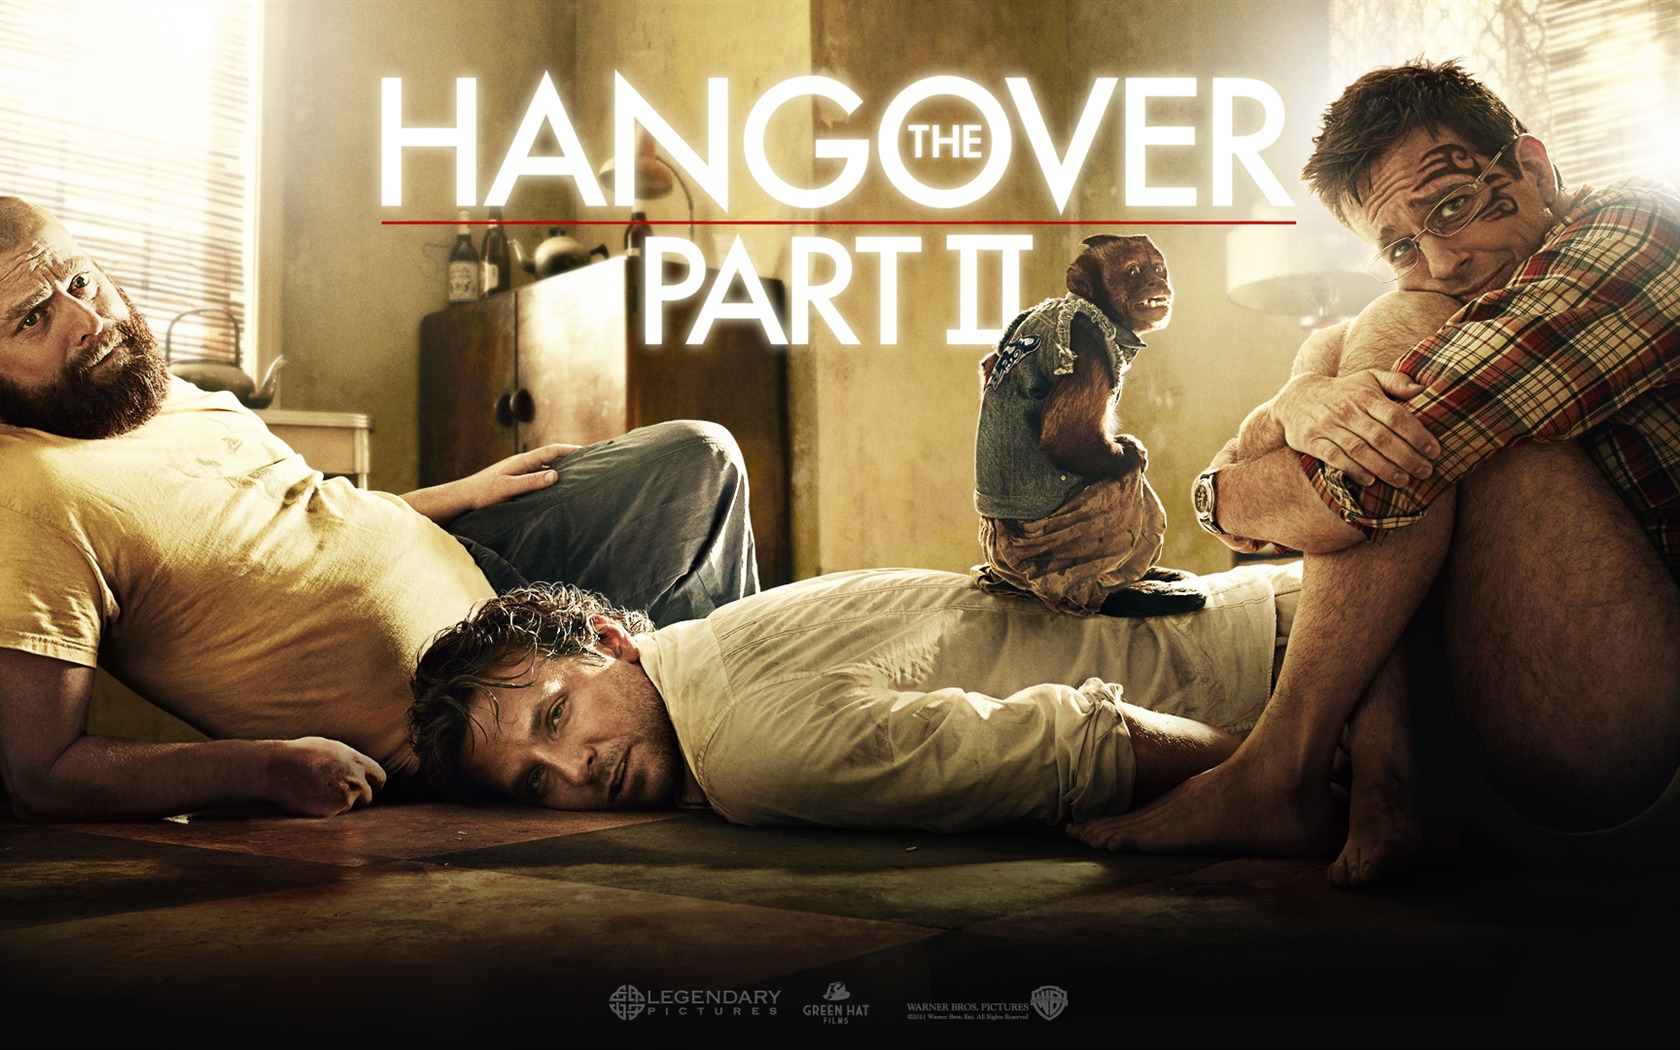 The Hangover část II tapety #9 - 1680x1050